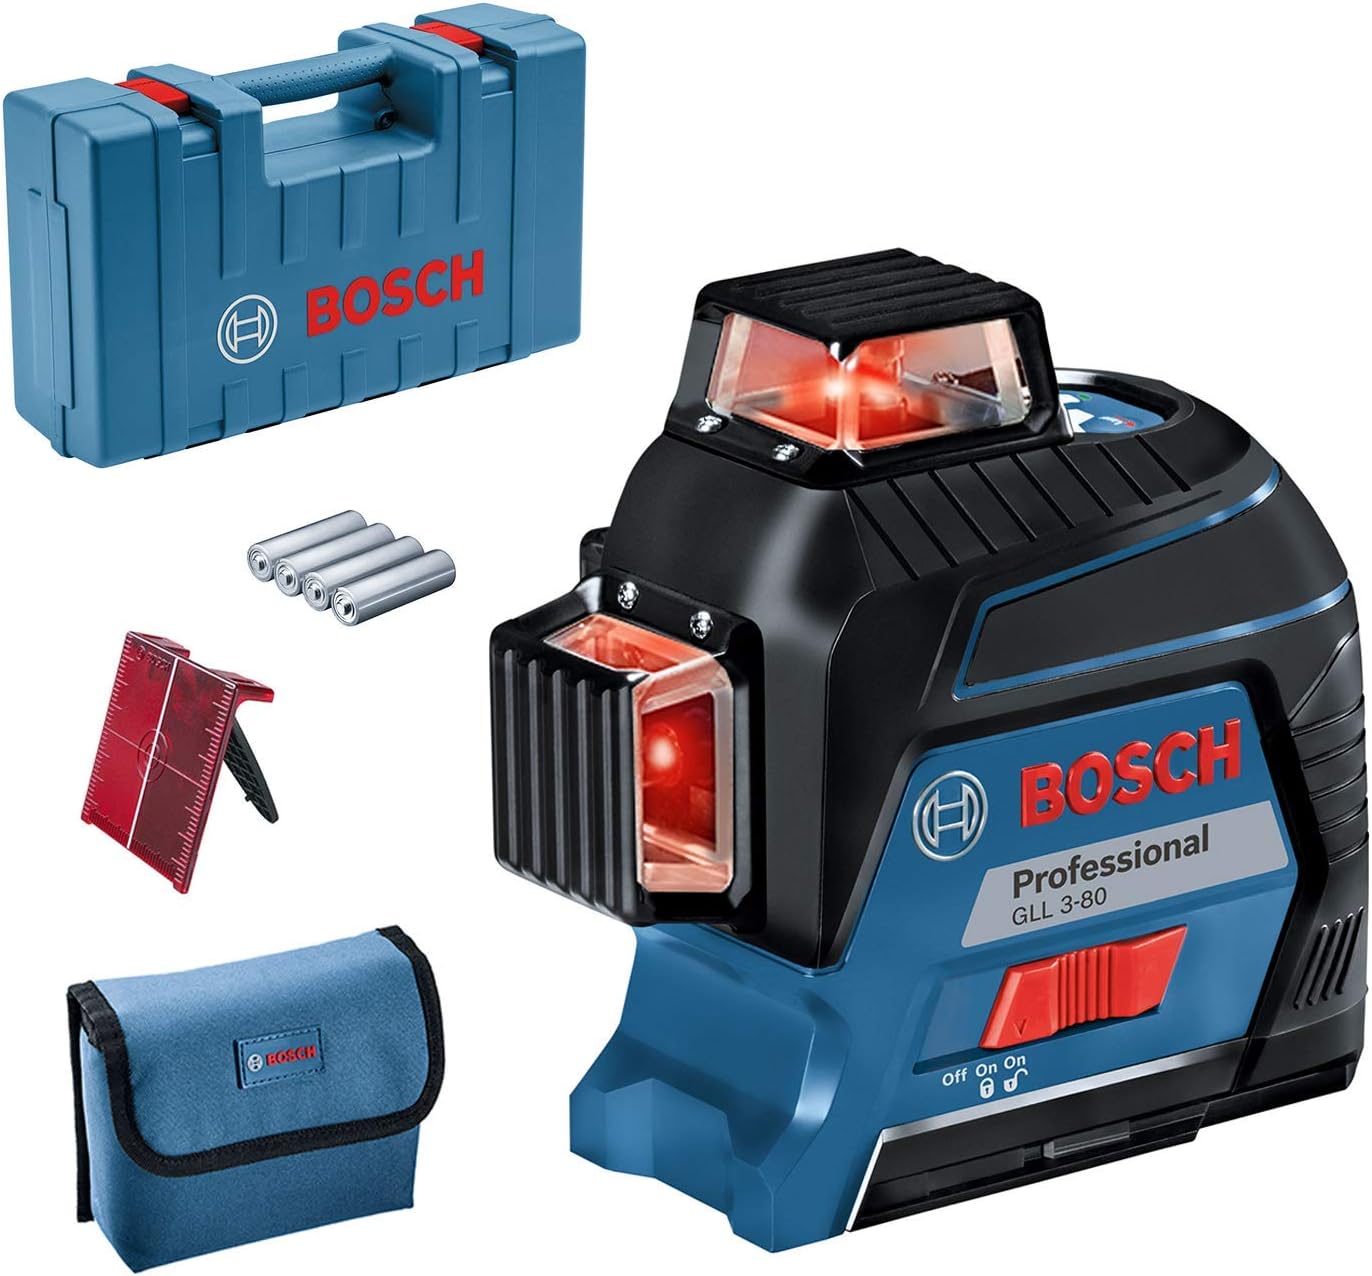 Bosch Professional Laser Level GLL 3-80 Review